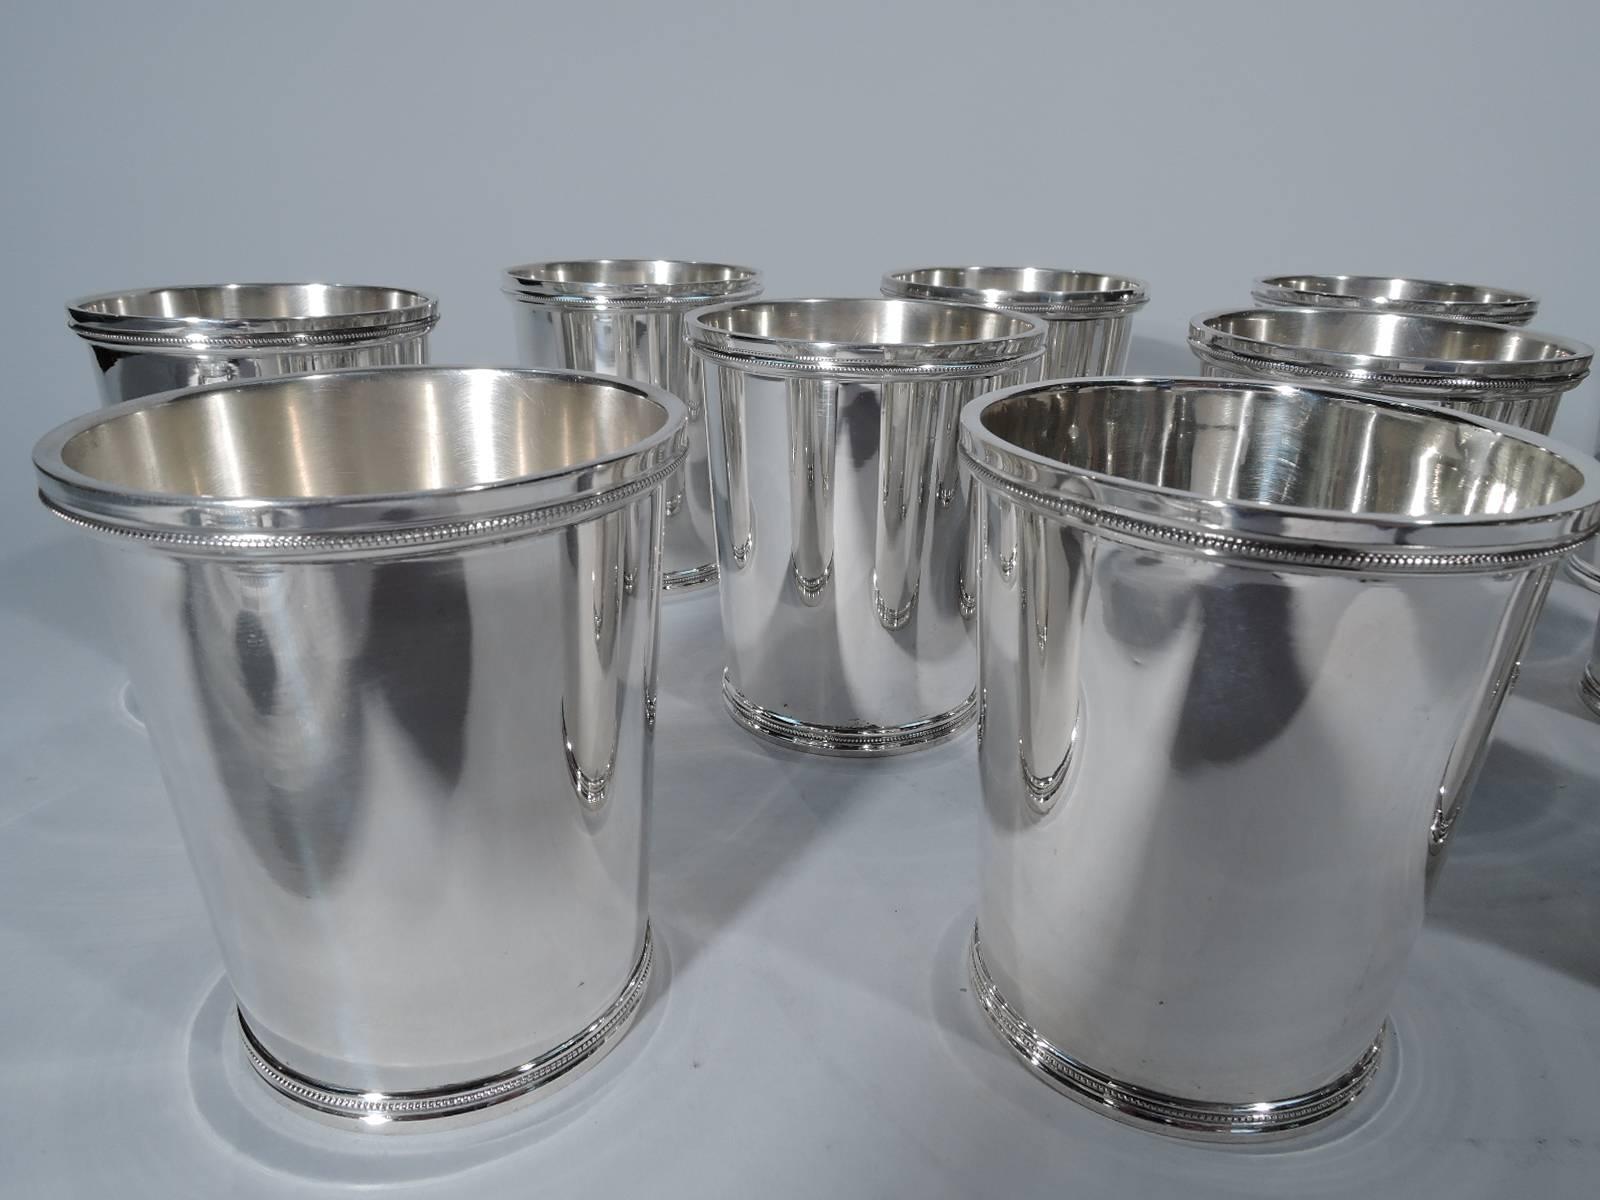 Set of 12 sterling silver mint julep cups. Straight and tapering sides. Molded rims with dentil. A great hard-to-find large set. Hallmarked Chicago Silver Co. (ca 1925-50) with no. 340. Very good condition.

Dimensions: H 3 3/4 x D 3 1/8 in. Total